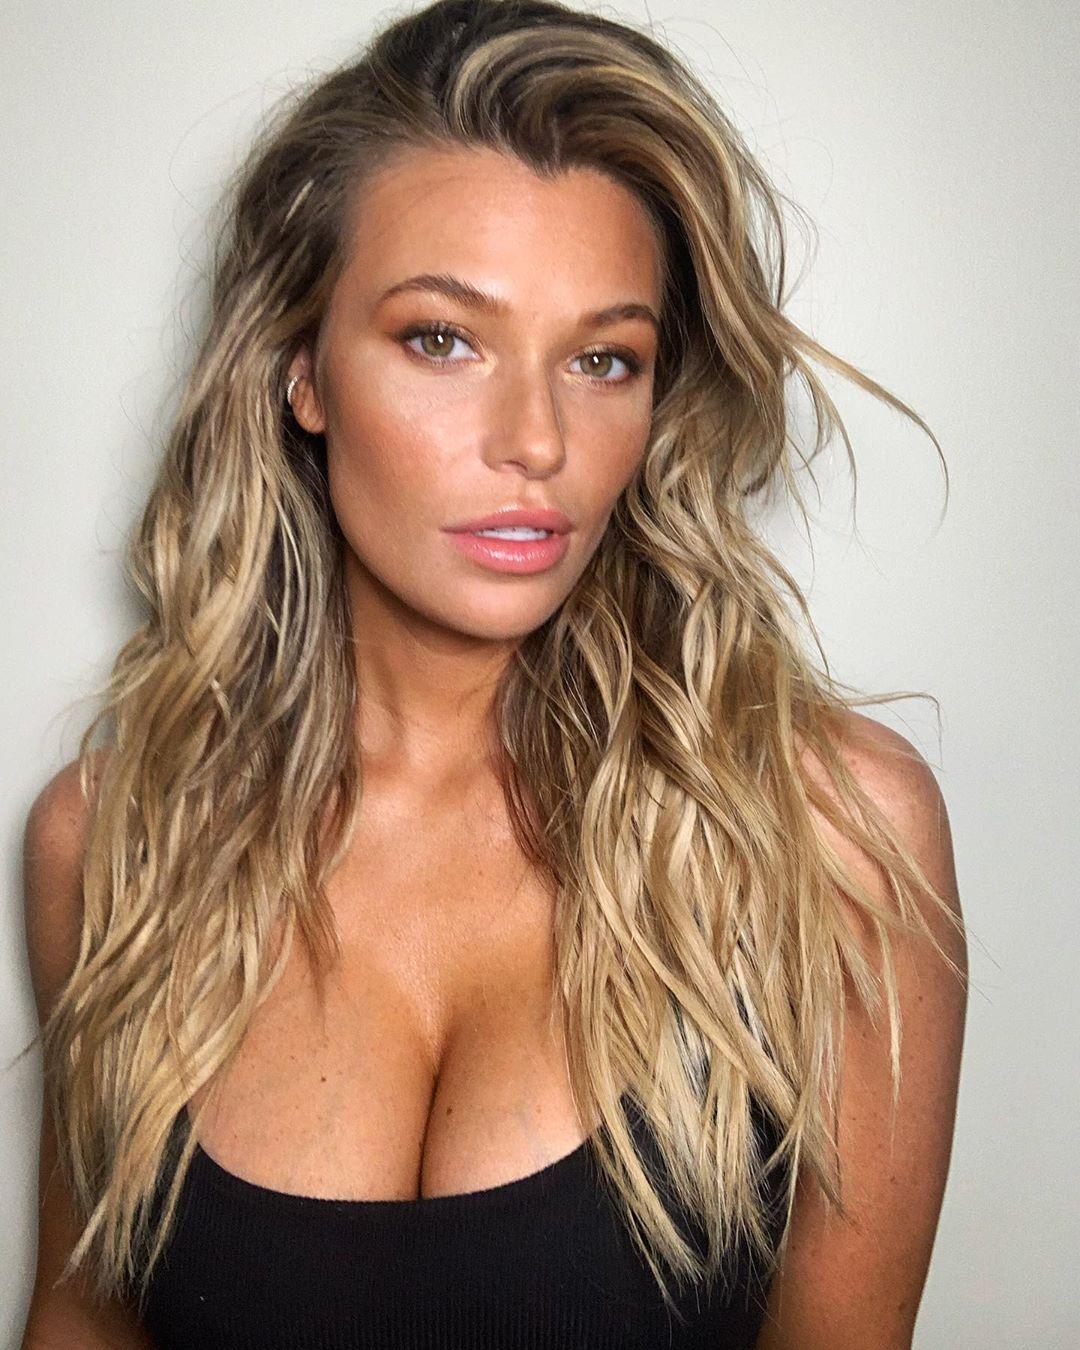 The Hottest Samantha Hoopes Photos Around The Net.